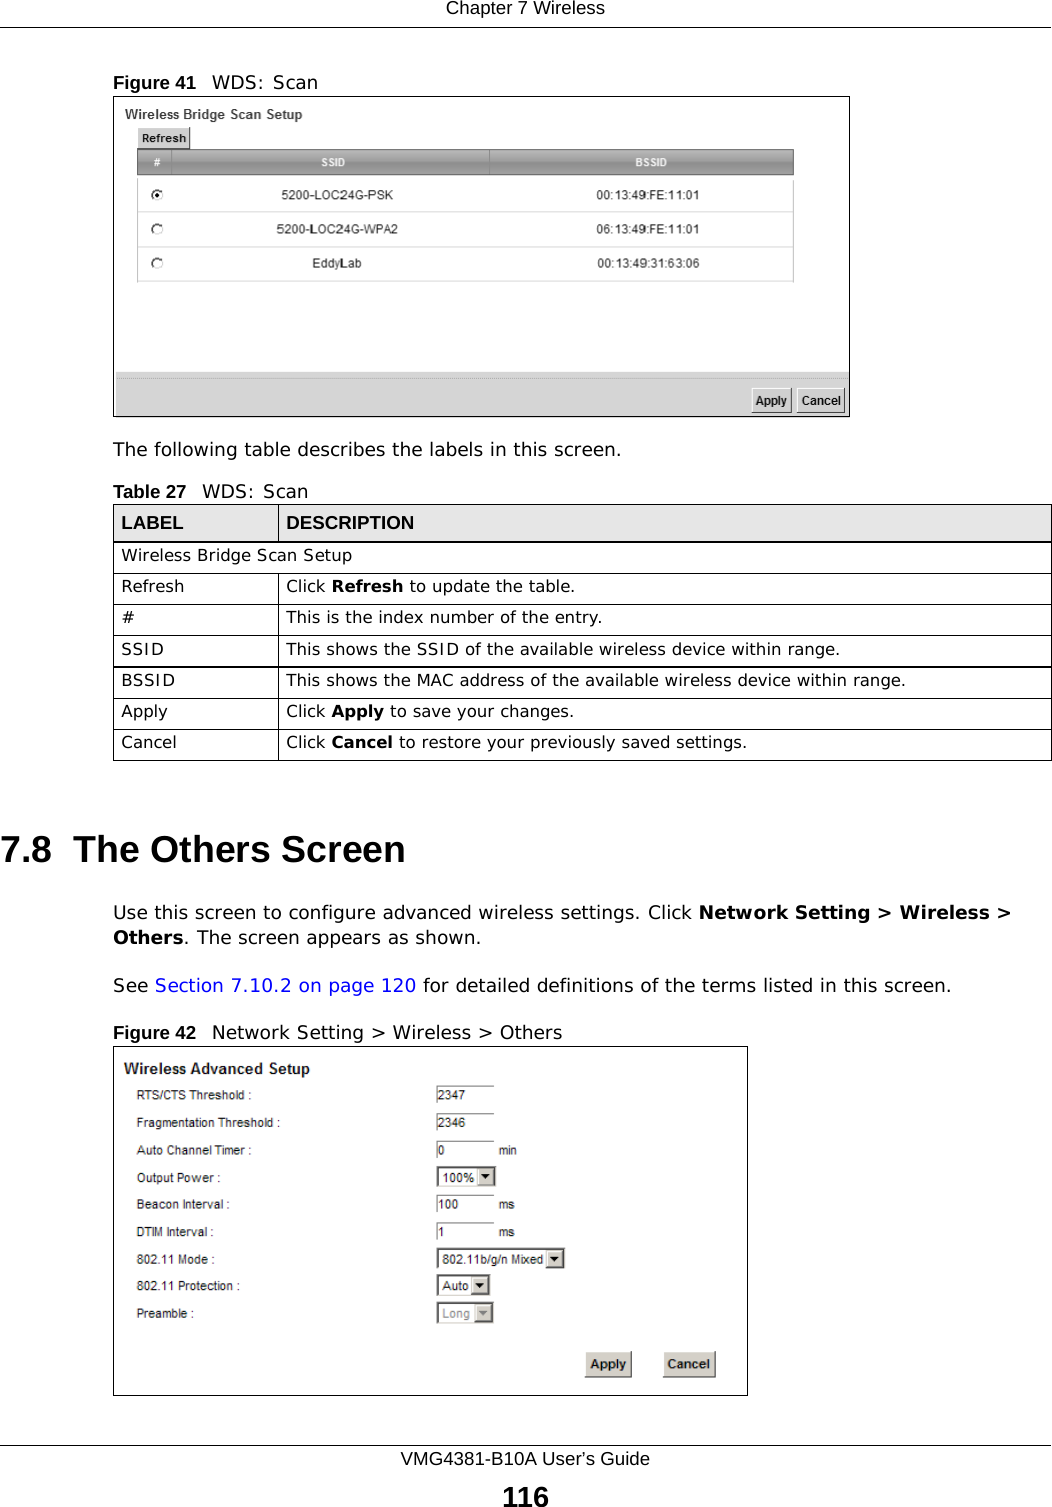 Chapter 7 WirelessVMG4381-B10A User’s Guide116Figure 41   WDS: ScanThe following table describes the labels in this screen.7.8  The Others ScreenUse this screen to configure advanced wireless settings. Click Network Setting &gt; Wireless &gt; Others. The screen appears as shown.See Section 7.10.2 on page 120 for detailed definitions of the terms listed in this screen.Figure 42   Network Setting &gt; Wireless &gt; OthersTable 27   WDS: ScanLABEL DESCRIPTIONWireless Bridge Scan SetupRefresh Click Refresh to update the table. # This is the index number of the entry.SSID This shows the SSID of the available wireless device within range.BSSID This shows the MAC address of the available wireless device within range.Apply Click Apply to save your changes.Cancel Click Cancel to restore your previously saved settings.